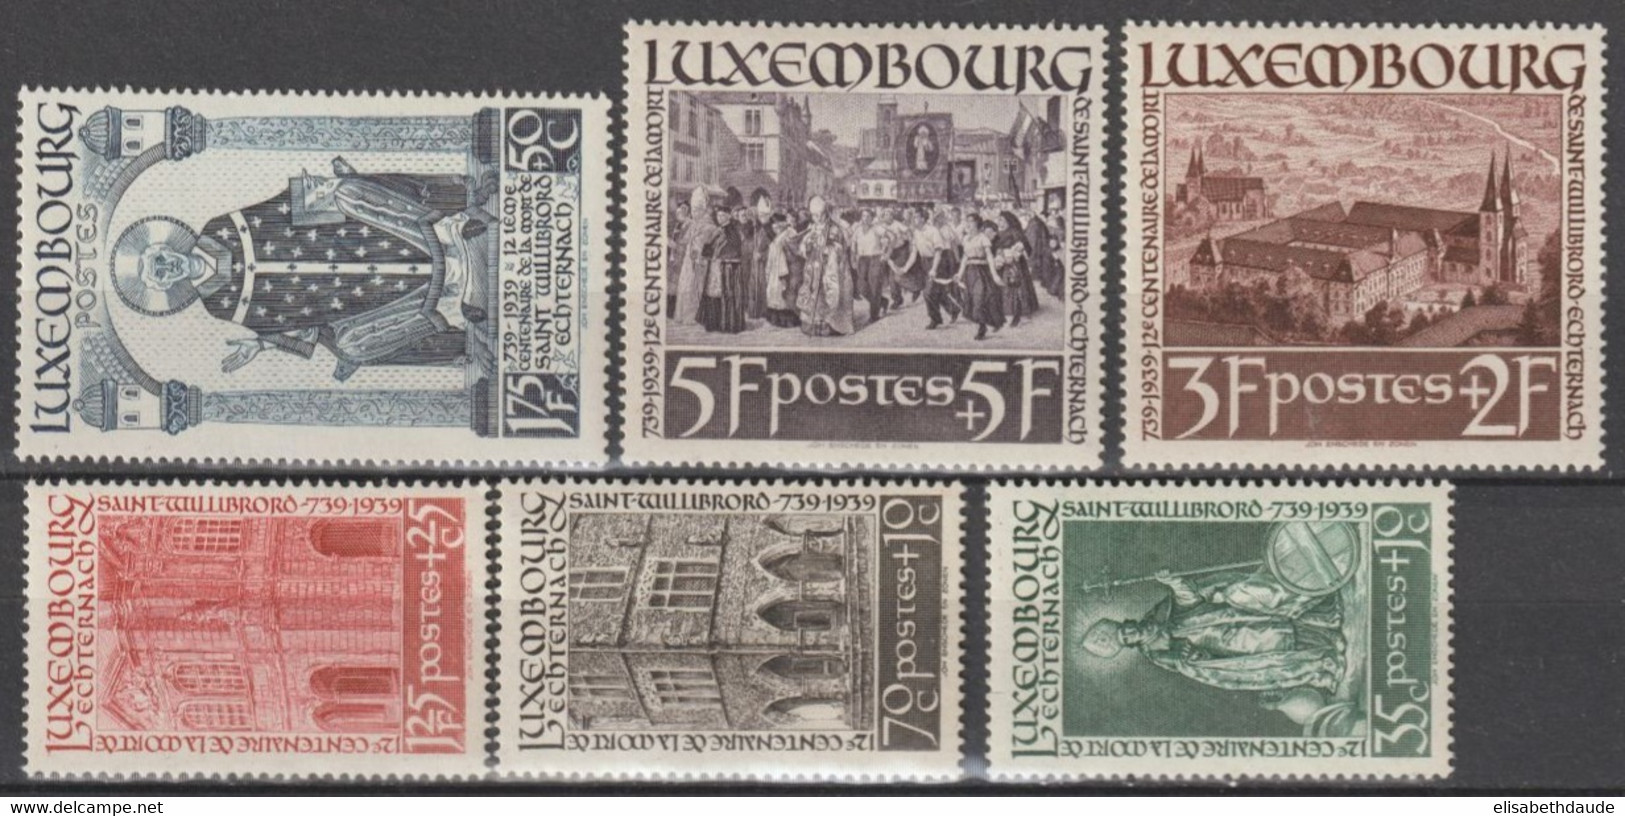 LUXEMBOURG - 1938 - SERIE COMPLETE YVERT N°300/305 * MLH  - COTE = 25 EUR. - Nuevos